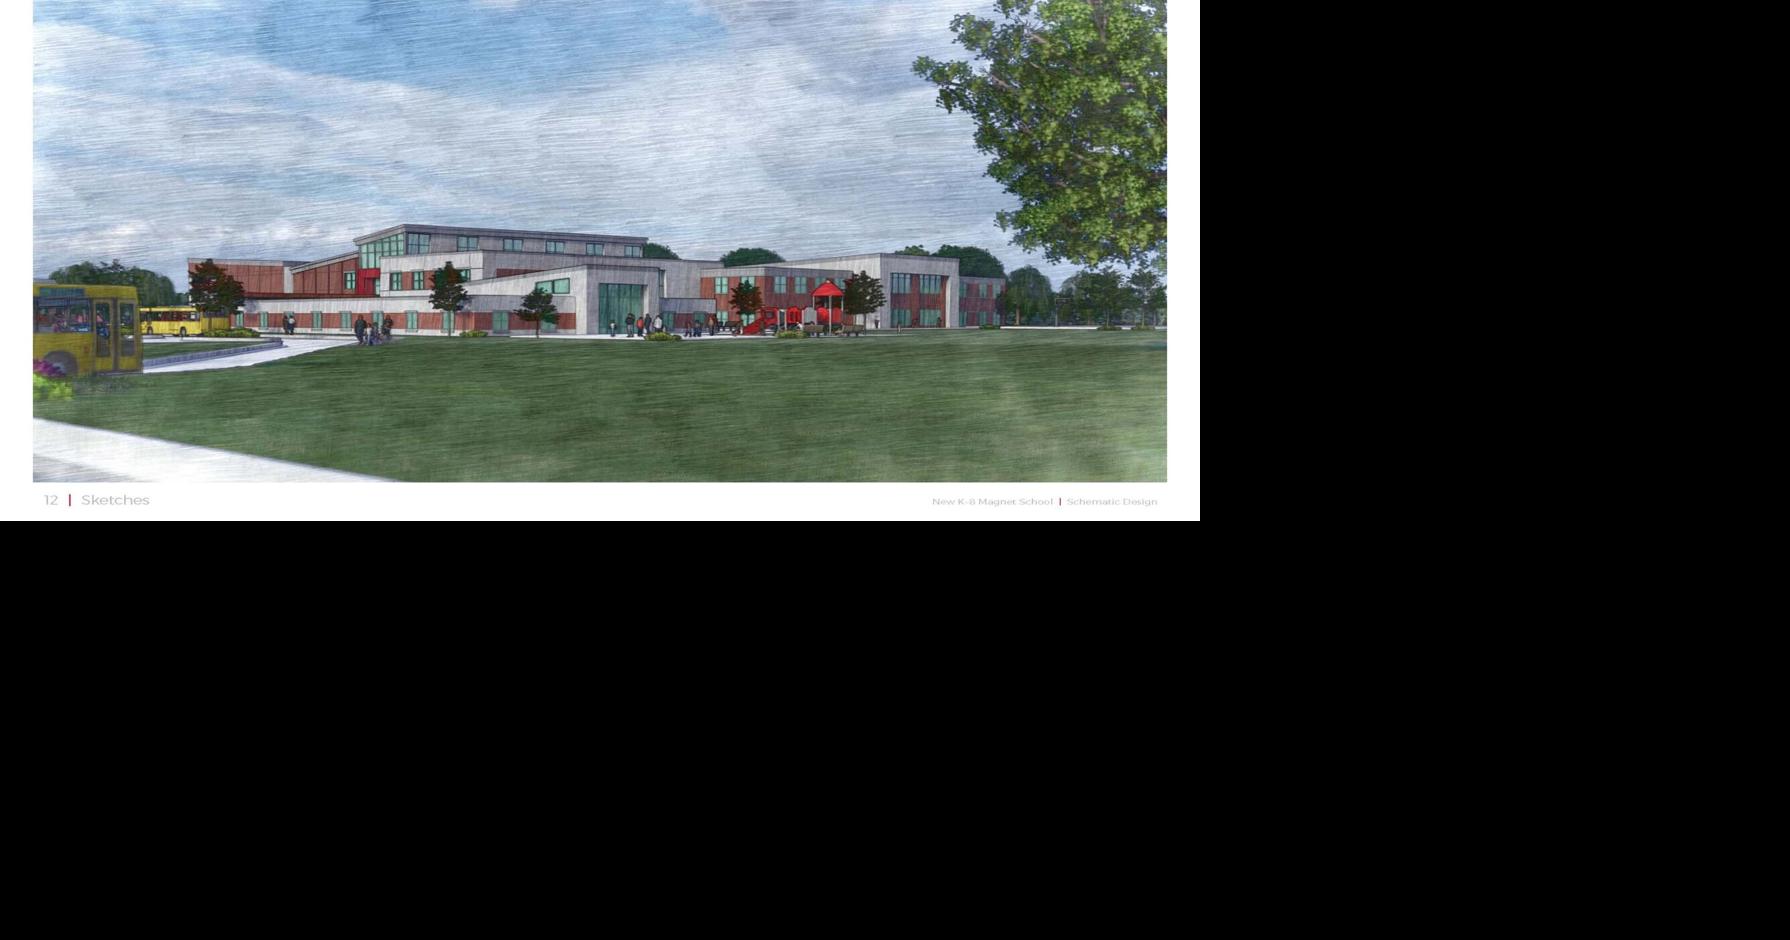 Preliminary plans for Decatur’s new STEM school building released |  Main stories